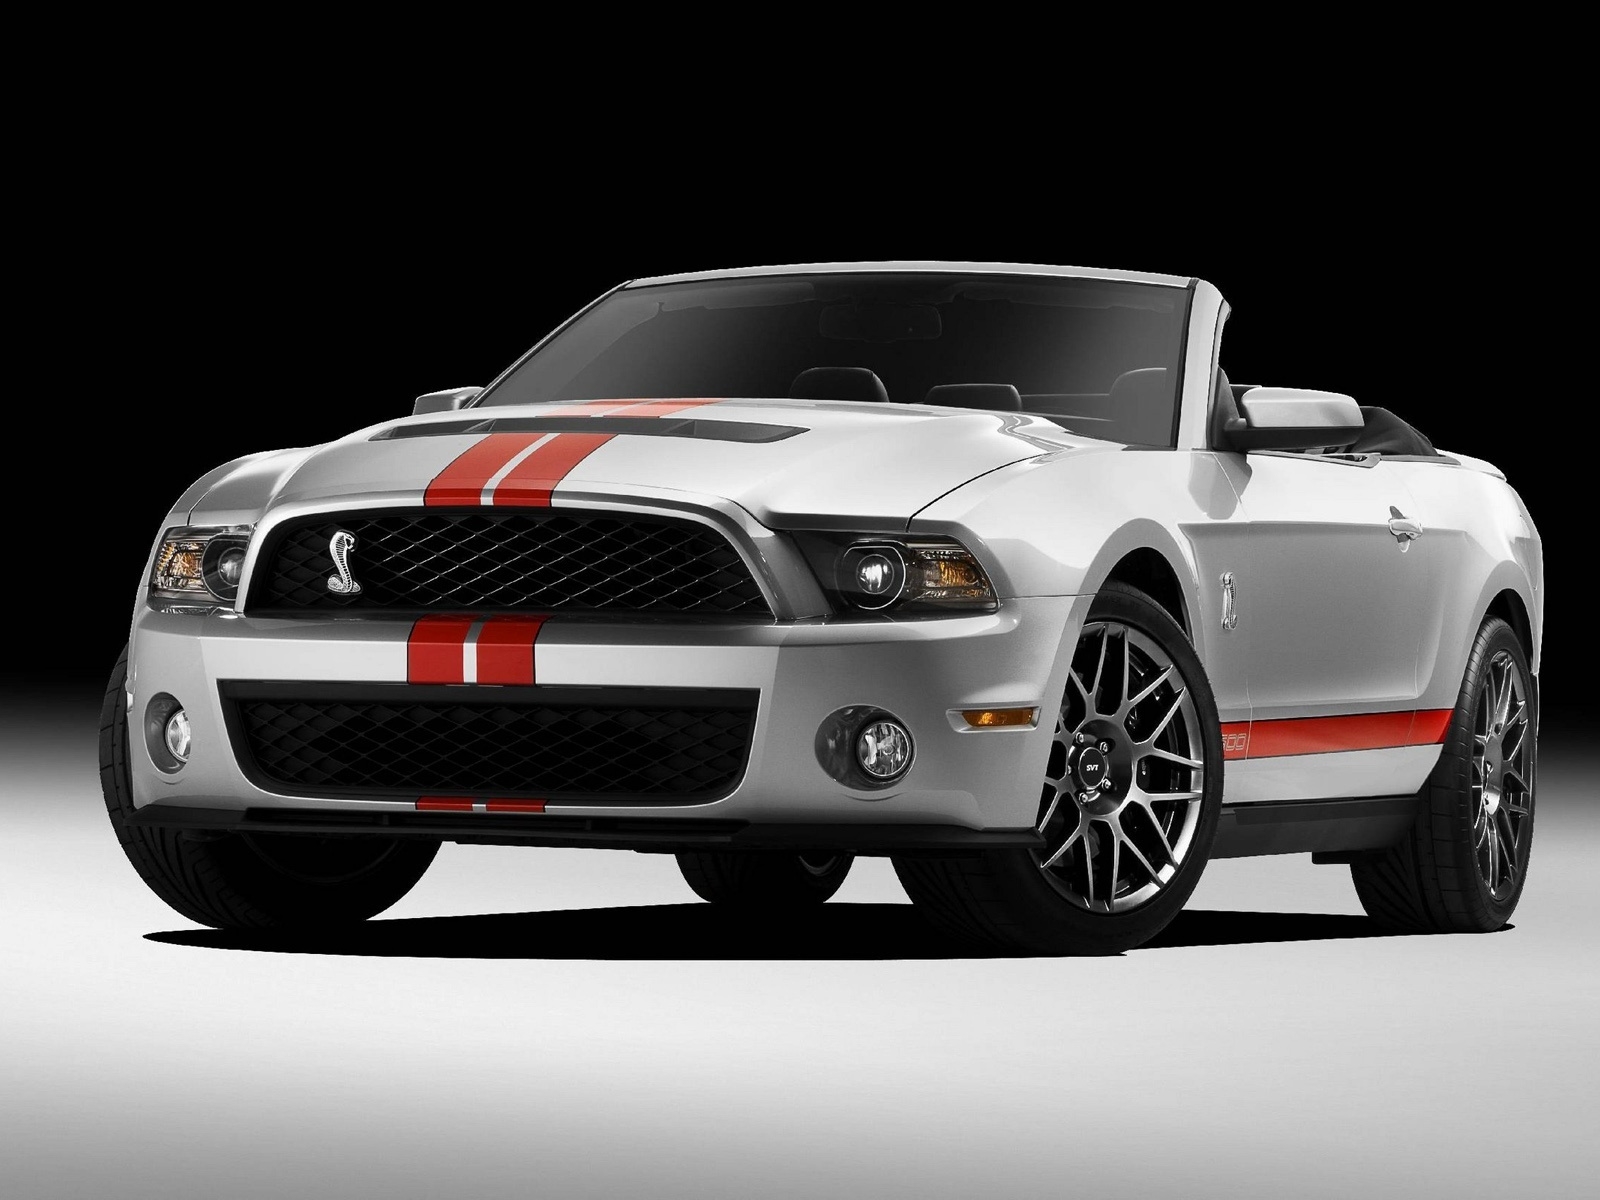 Ford Shelby GT500 Convertible 2010 for 1600 x 1200 resolution